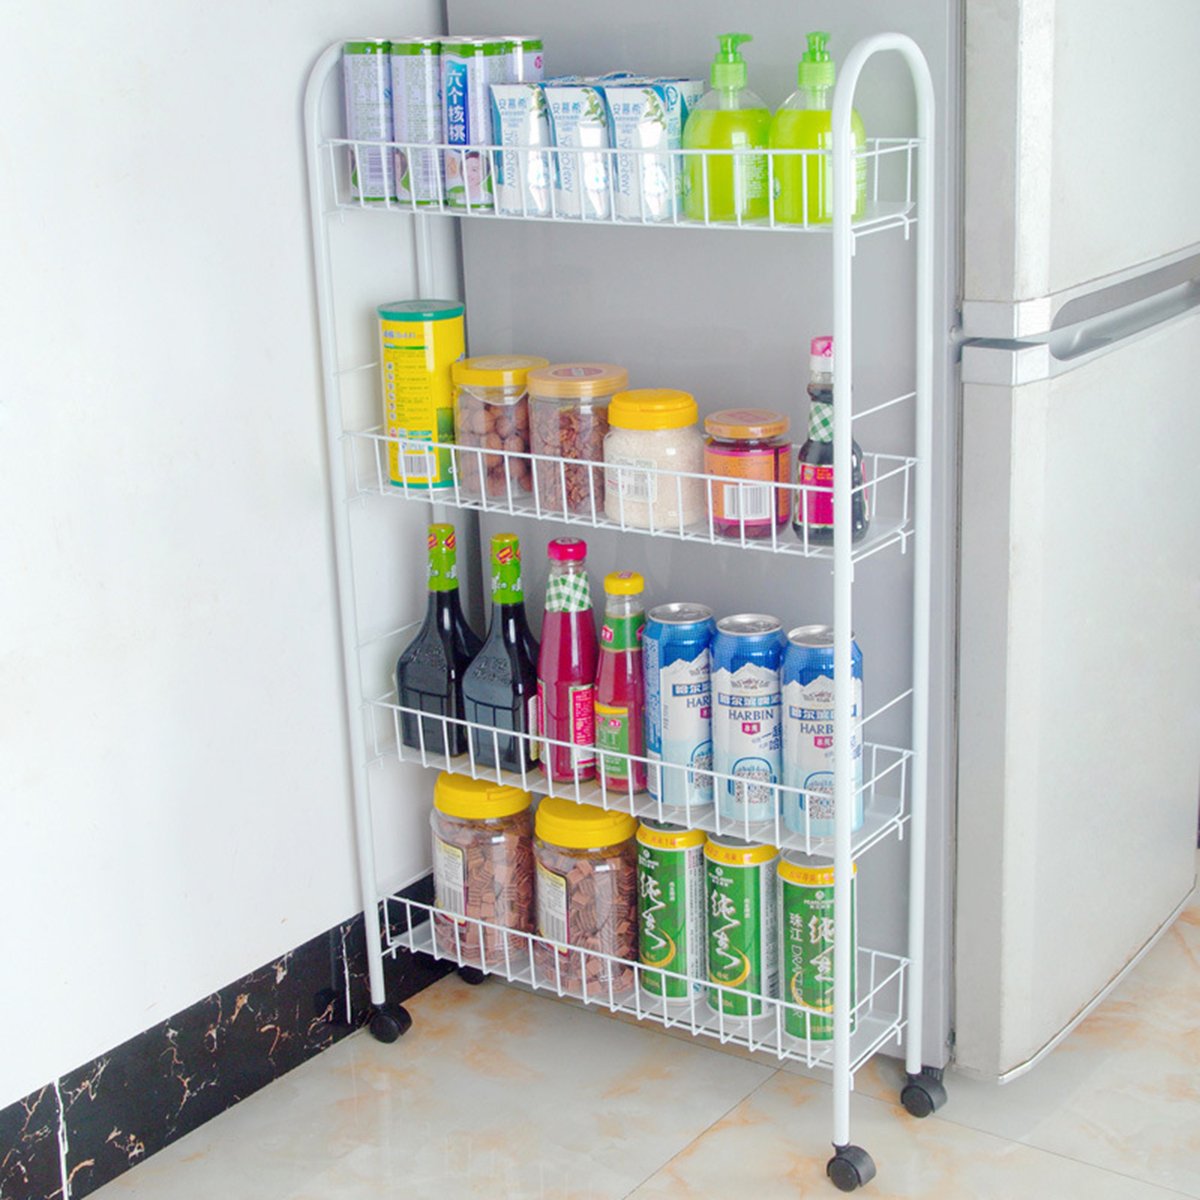 34-Layers-Multi-function-Shelf-Portable-Cart-Wheels-for-Household-Kitchen-Items-Storage-1671773-6